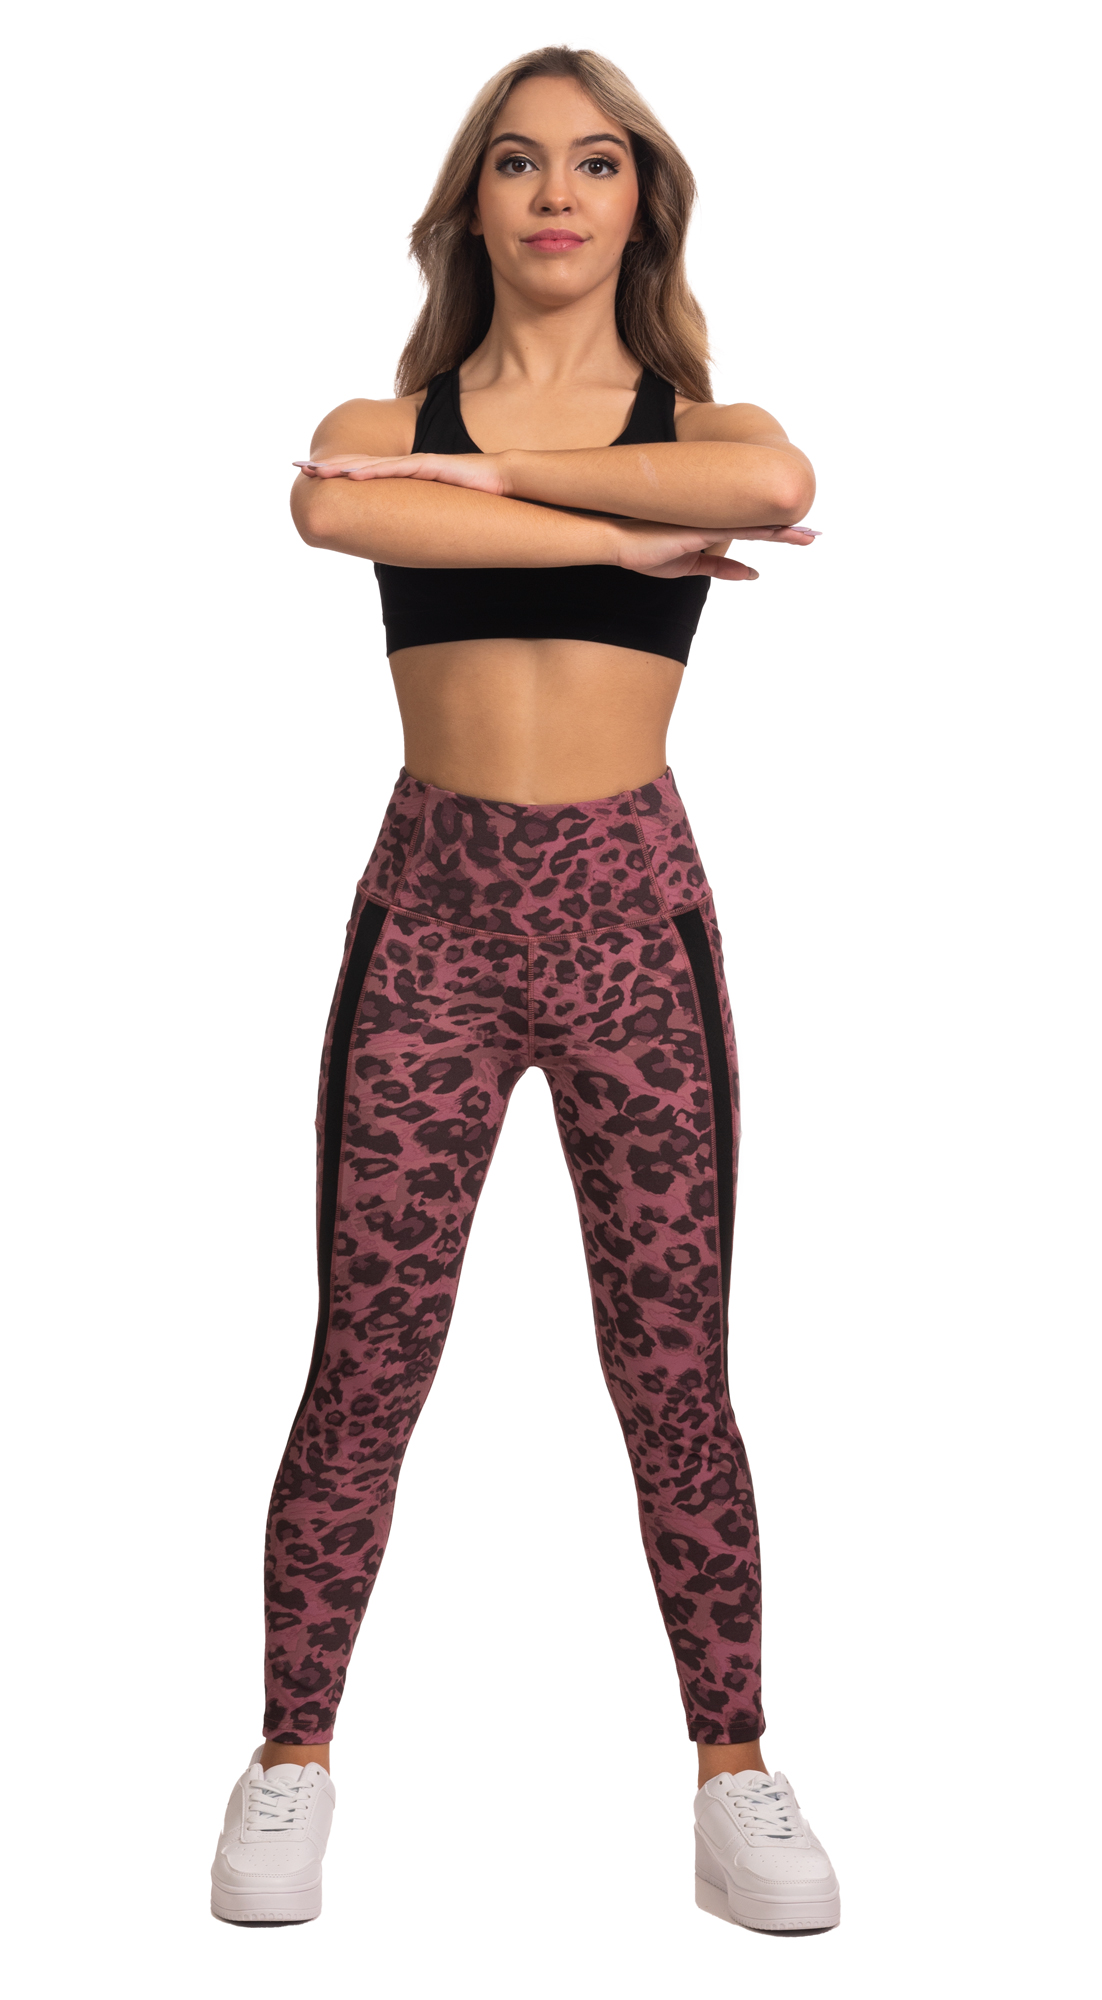 Athleticwear Product Photography at Retail Shots